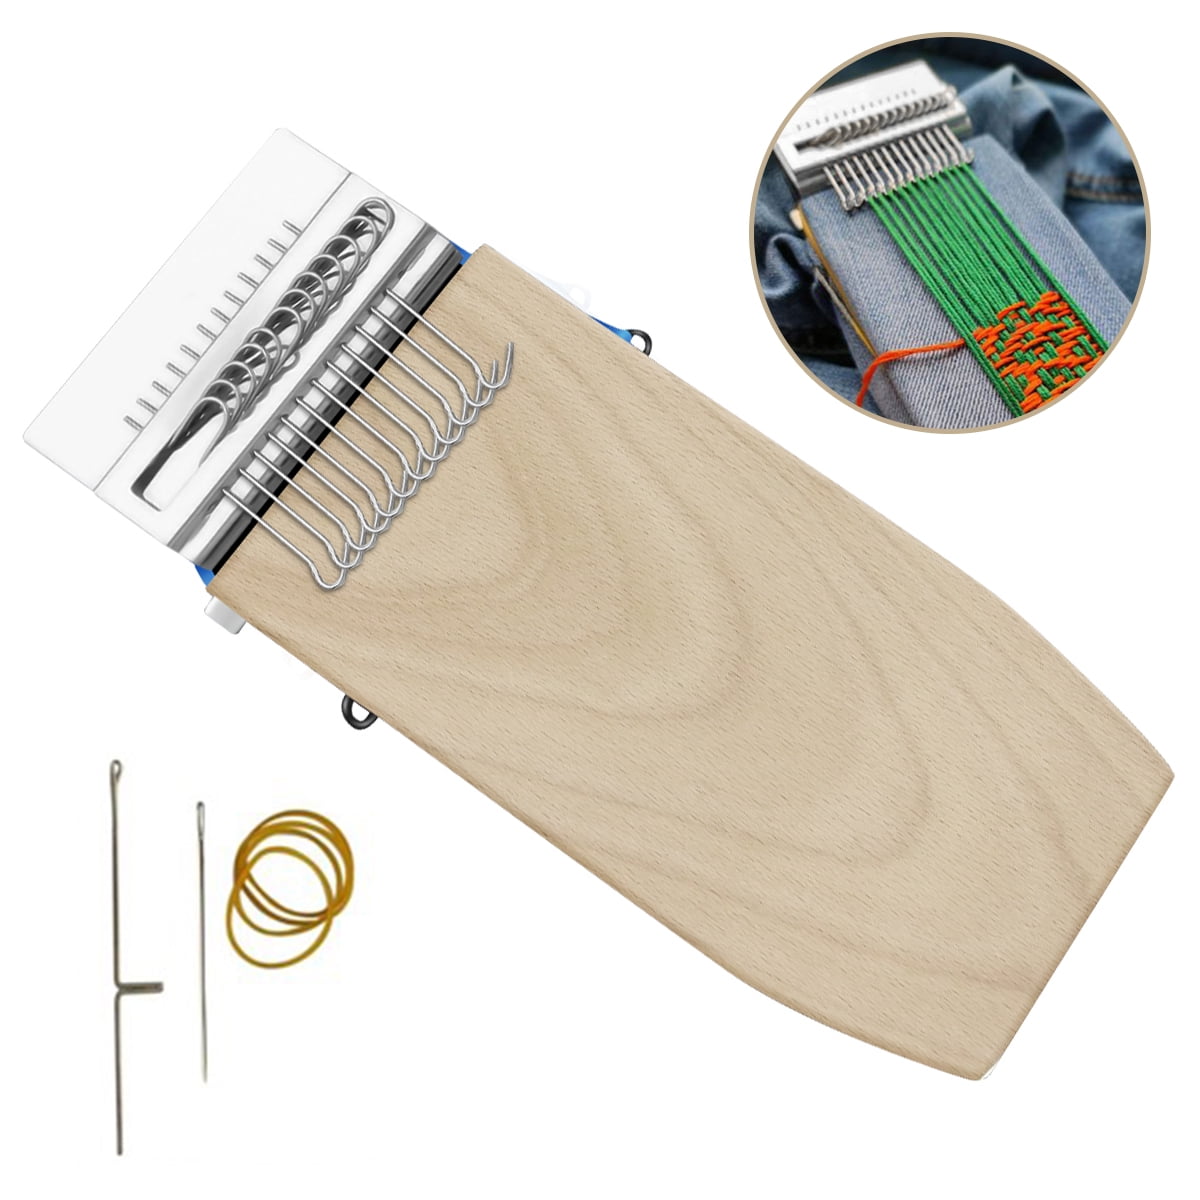 Most Convenient Darning Loom for Mending Jeans Socks and Clothes Quickly and Easily Fun Mending Loom Makes Beautiful Stitching Machine Small Loom-Speedweve Type Weave Tool 14 Hooks 